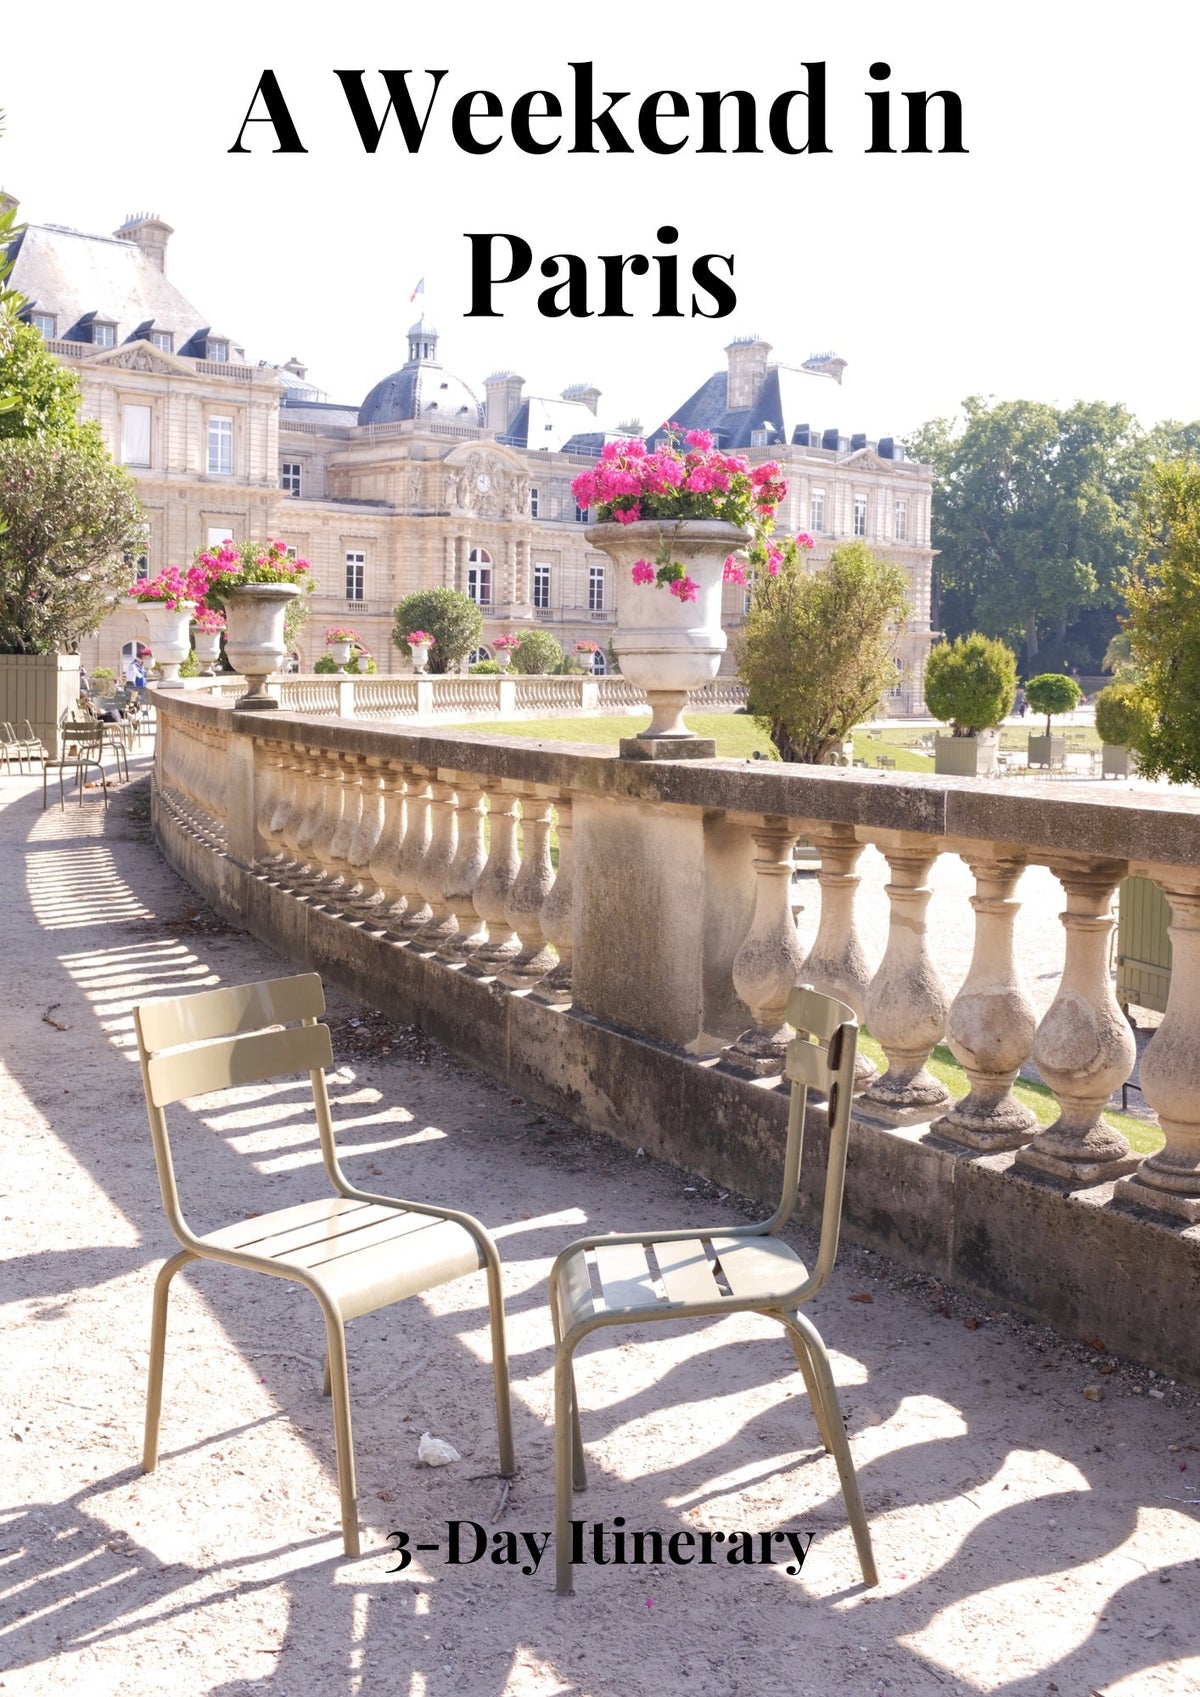 The Paris Guide 2024 Edition and 3-day Itinerary Bundle